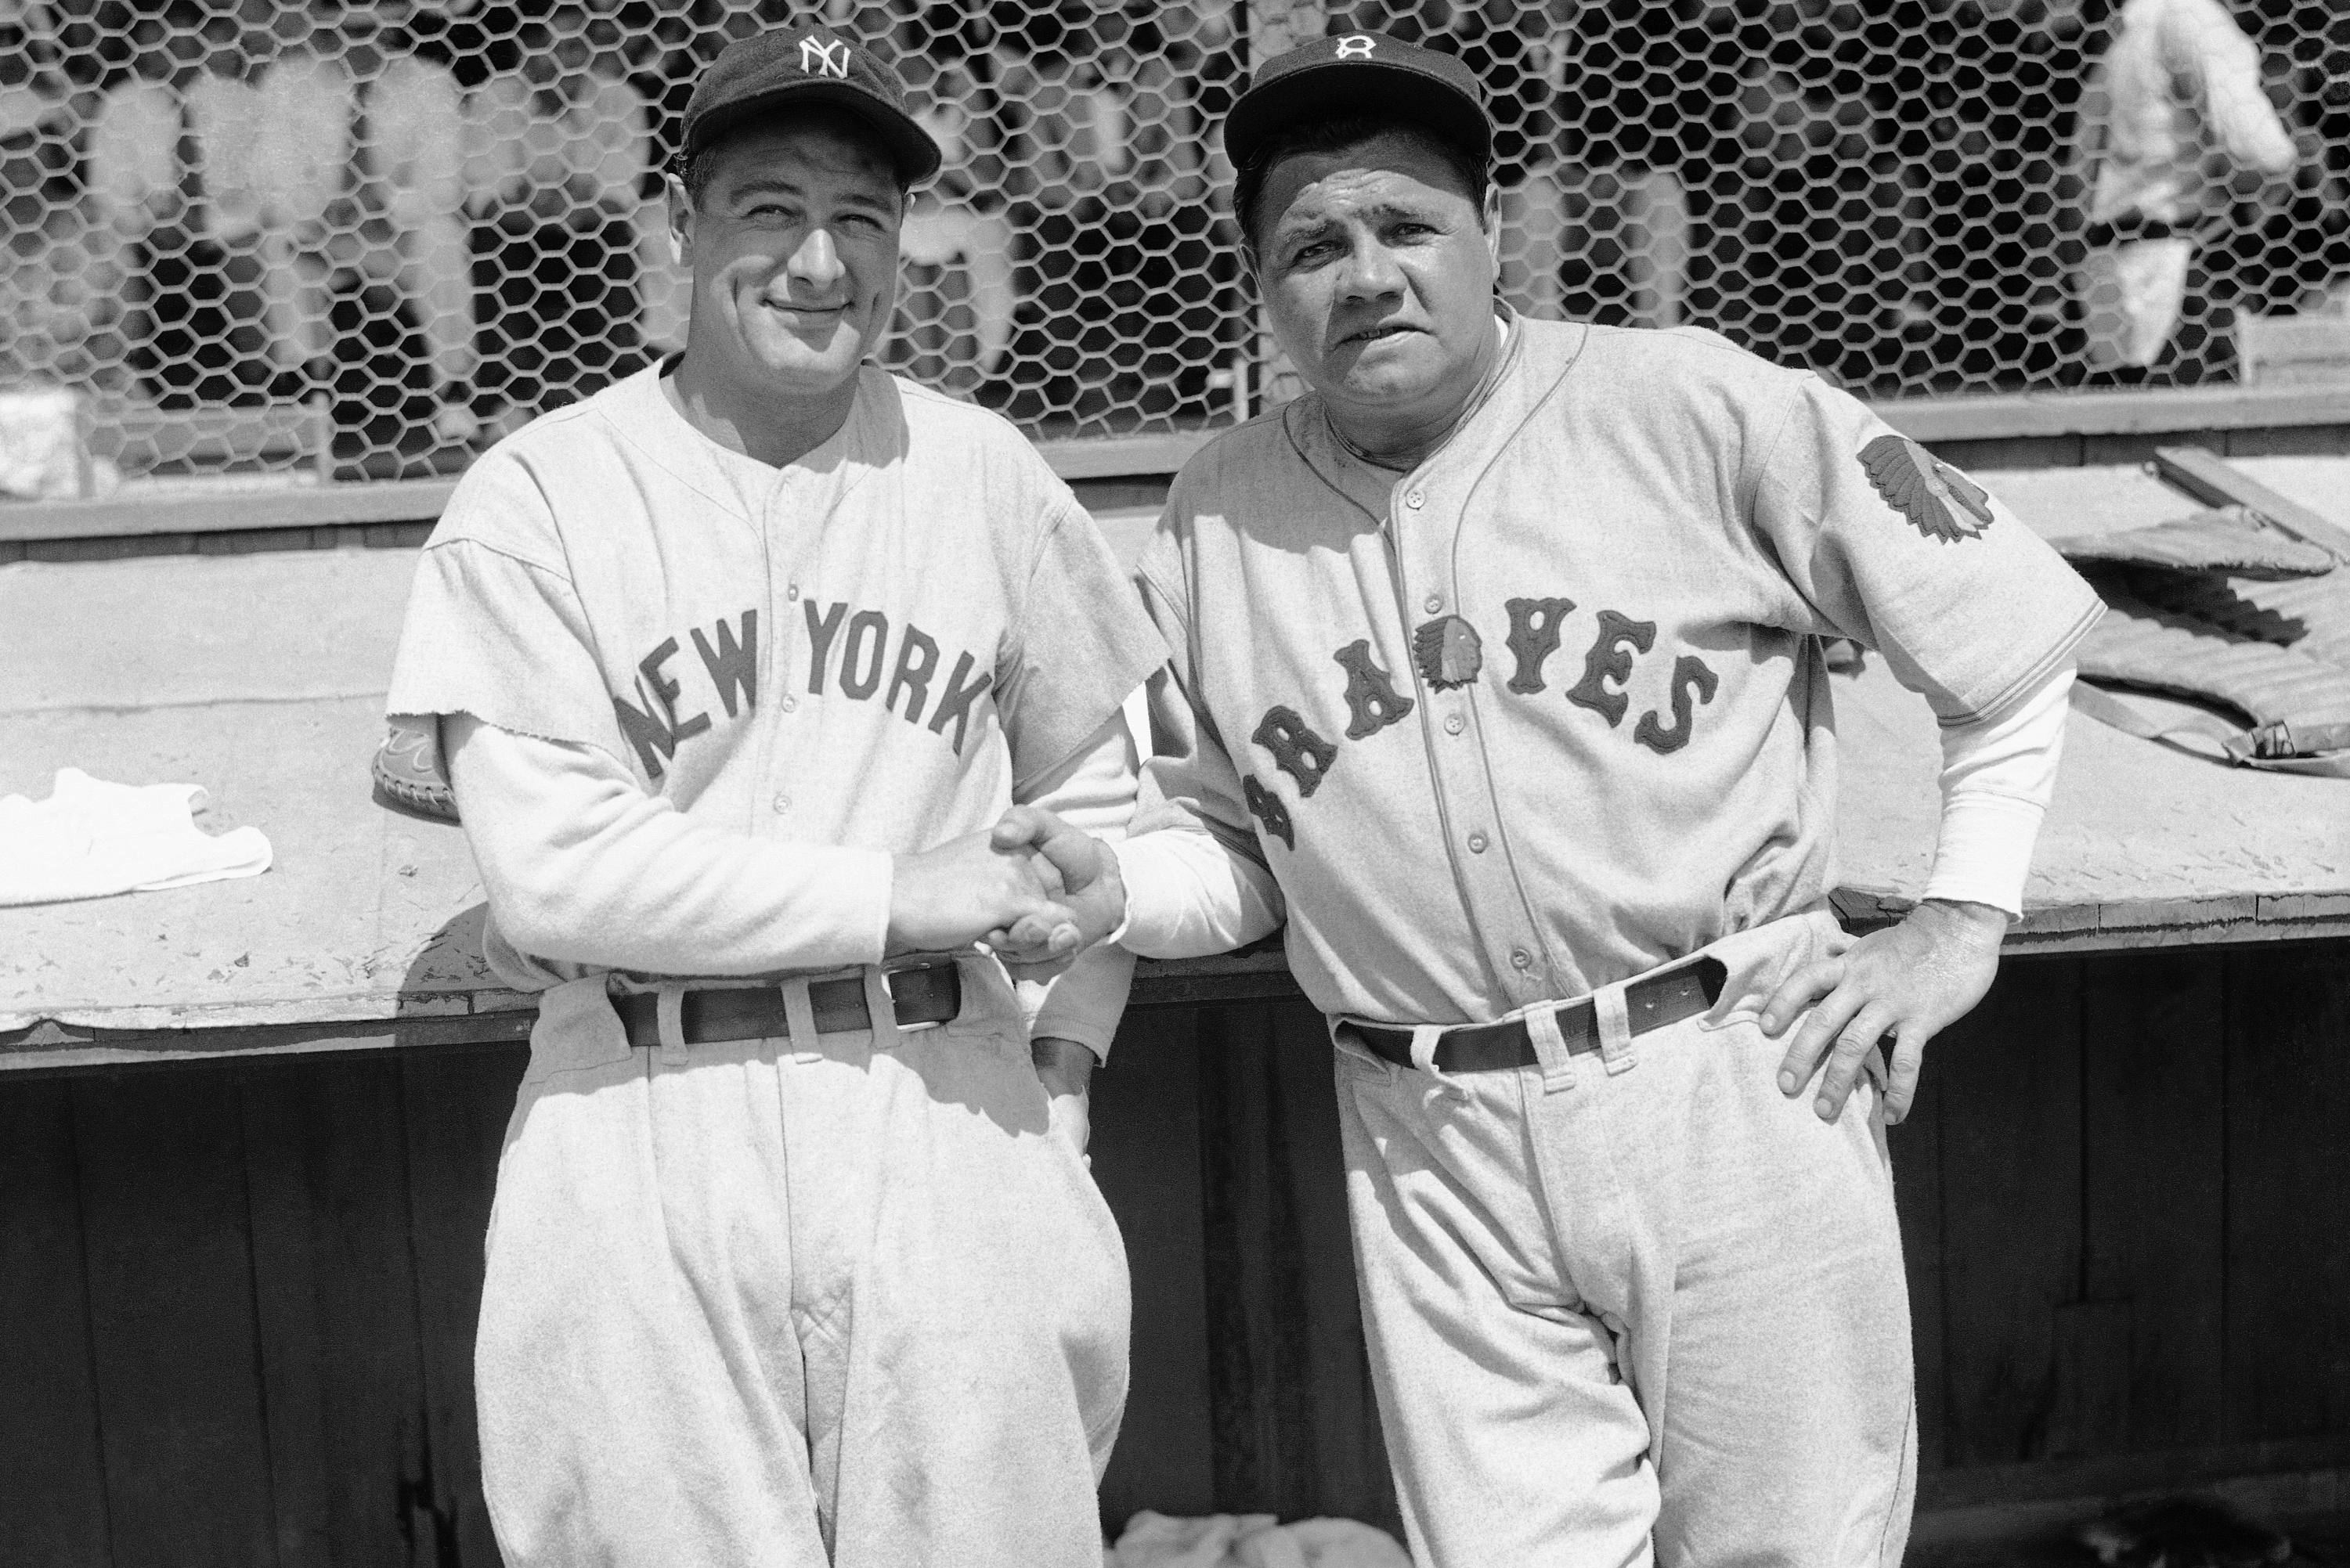 Babe Ruth jersey expected to sell at auction for over $4.5 Million